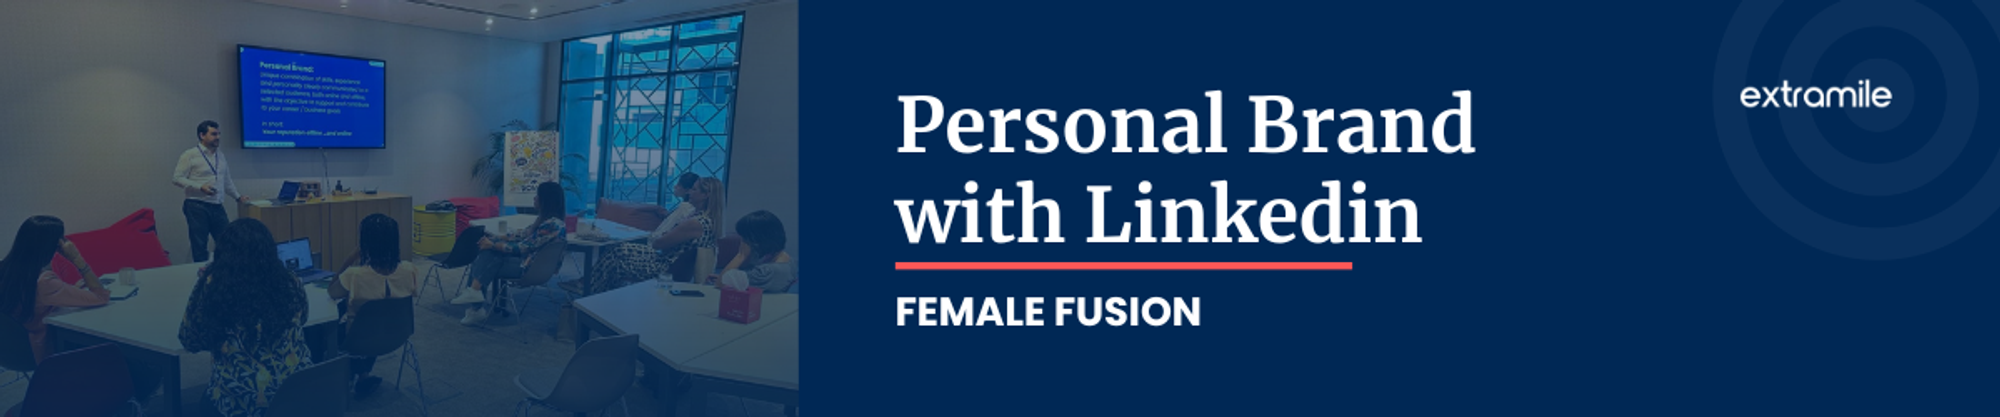 Personal Brand with Linkedin - Female Fusion